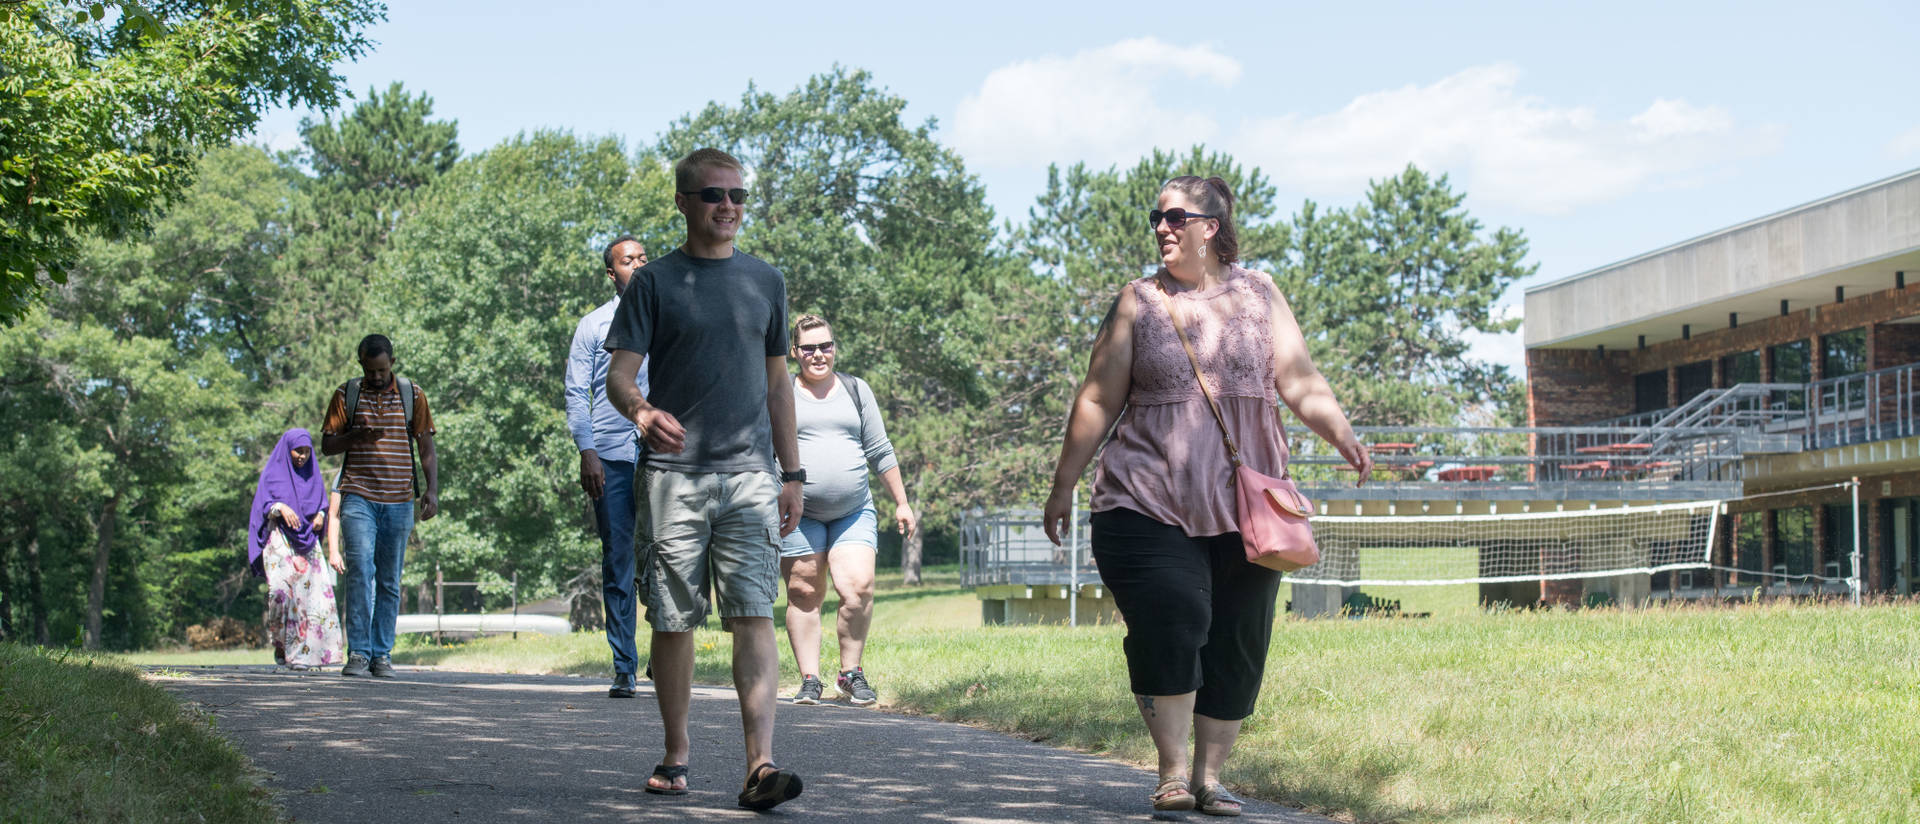 UW-Eau Claire – Barron County students walk across campus on a summer day.